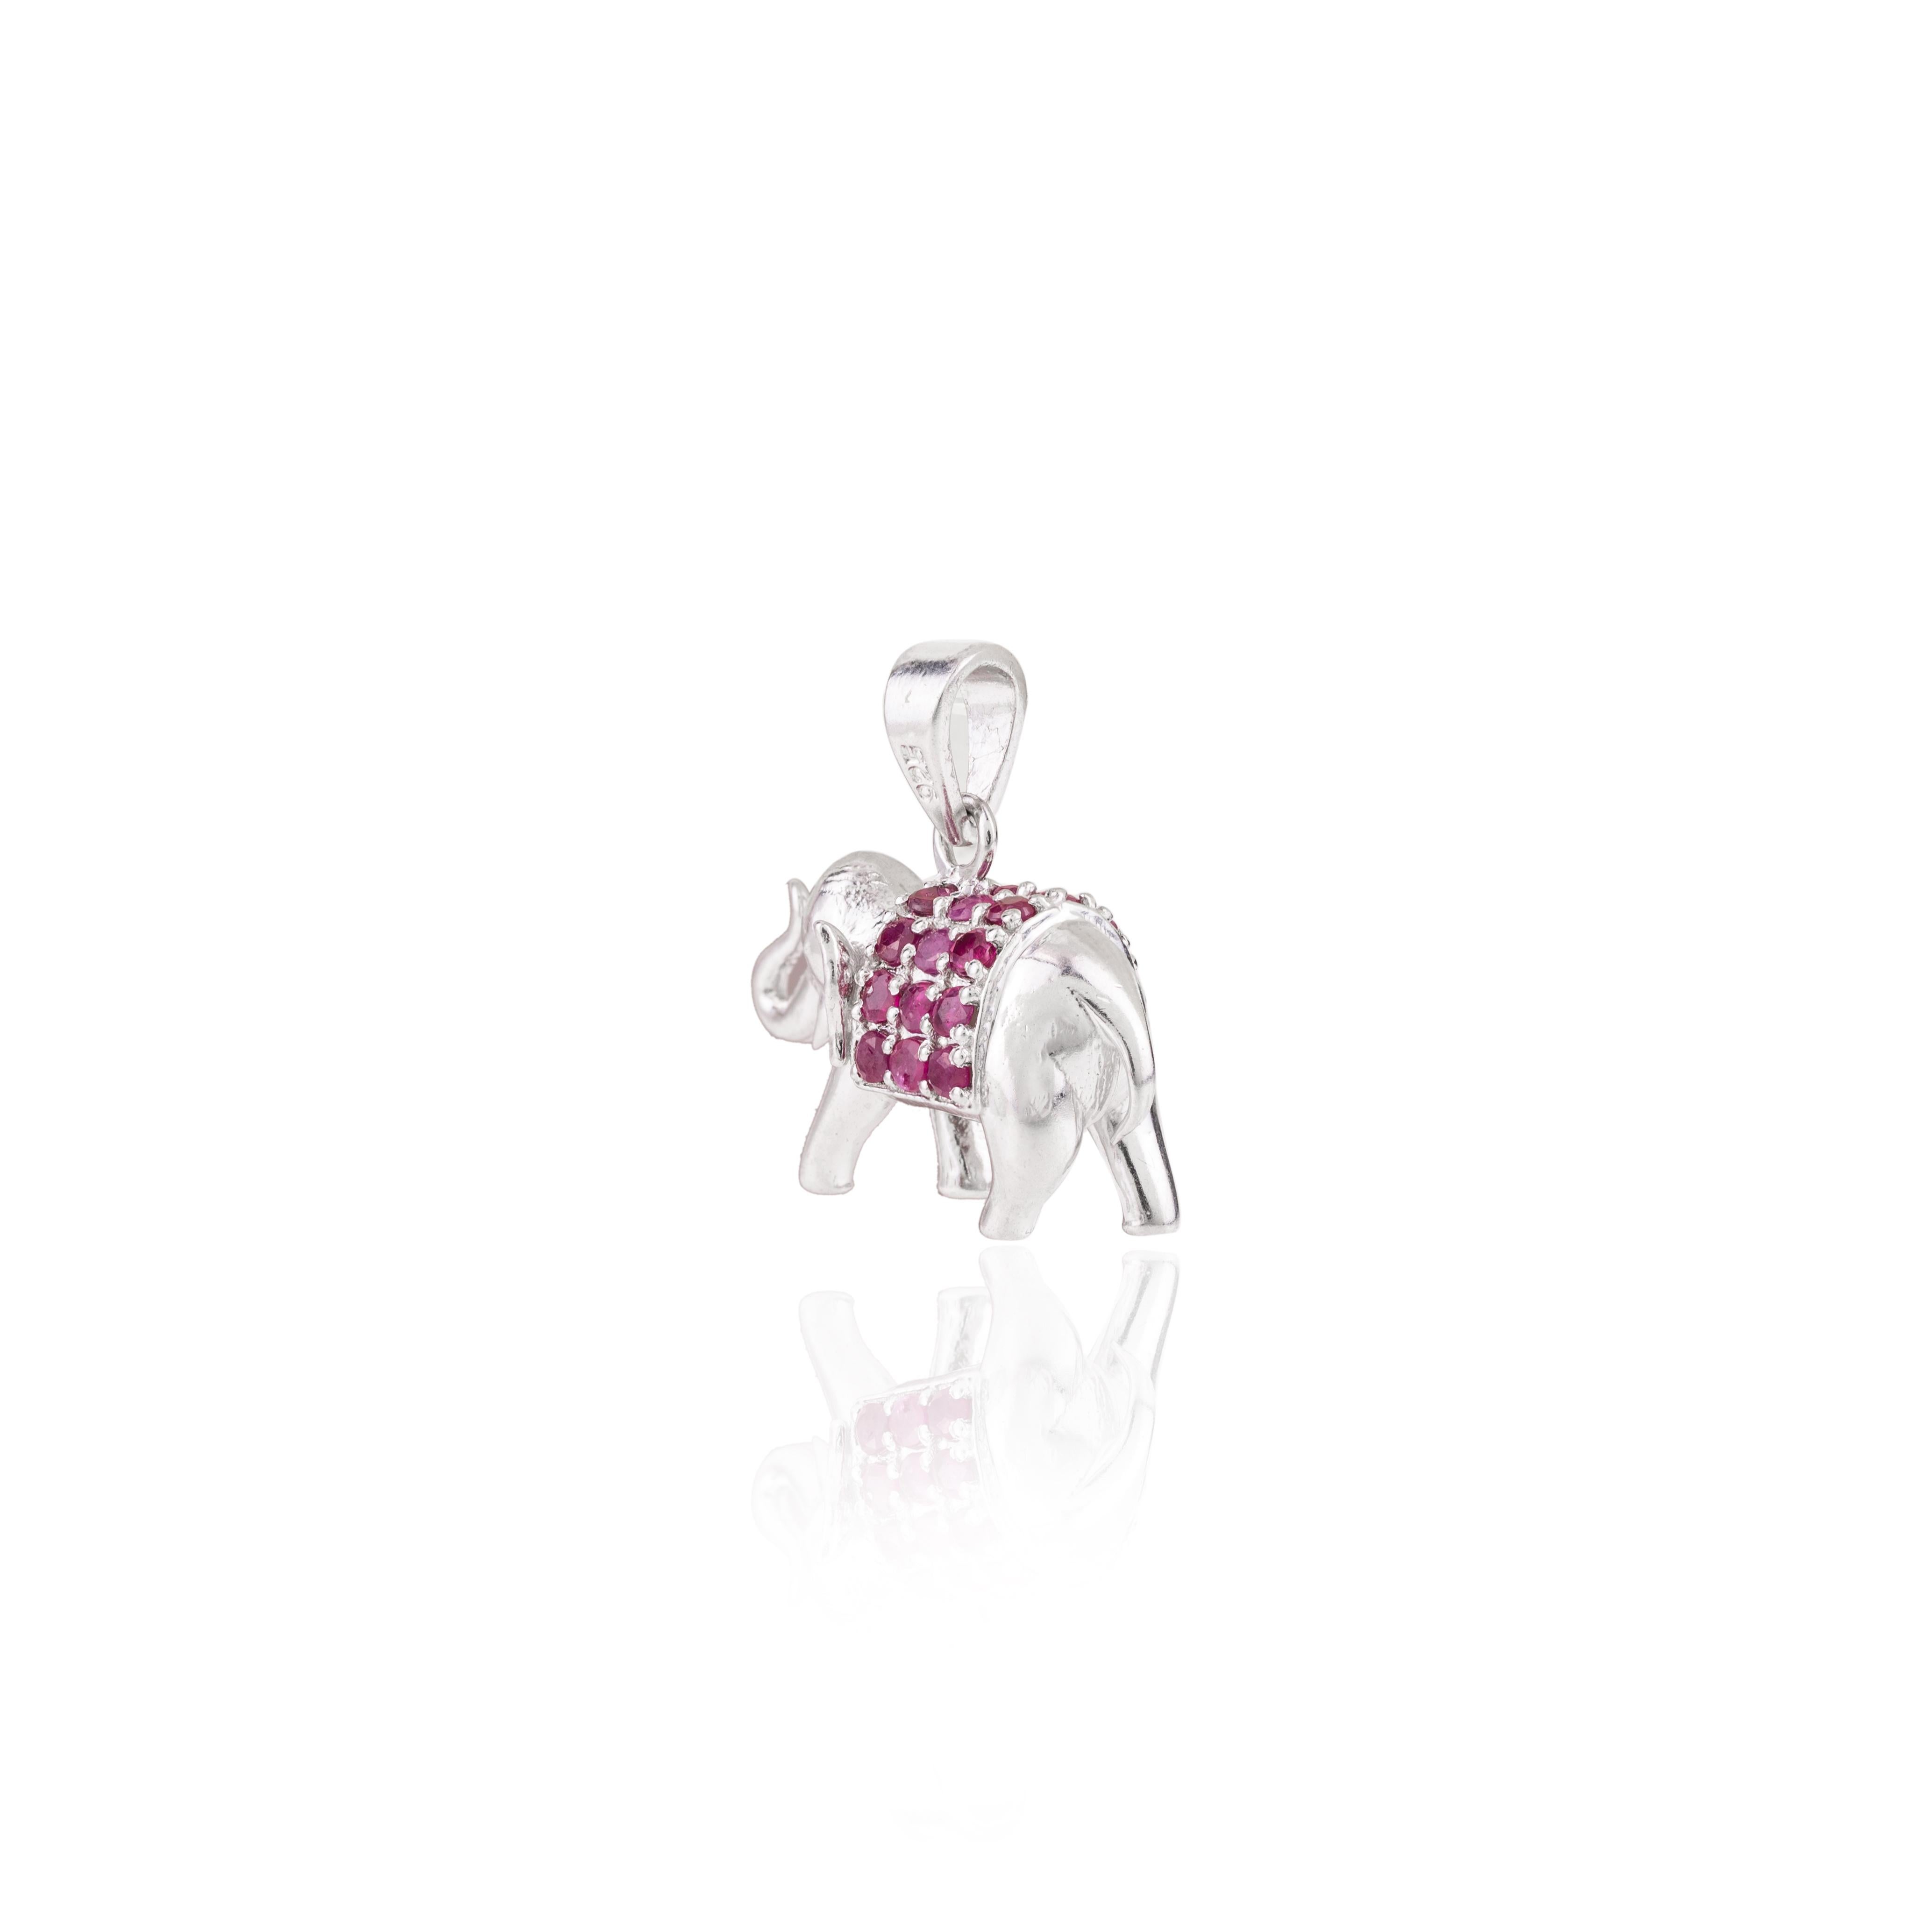 This Natural Ruby Elephant Pendant is meticulously crafted from the finest materials and adorned with stunning ruby which enhances confidence, leadership qualities and attract career opportunities.
This delicate to statement pendants, suits every